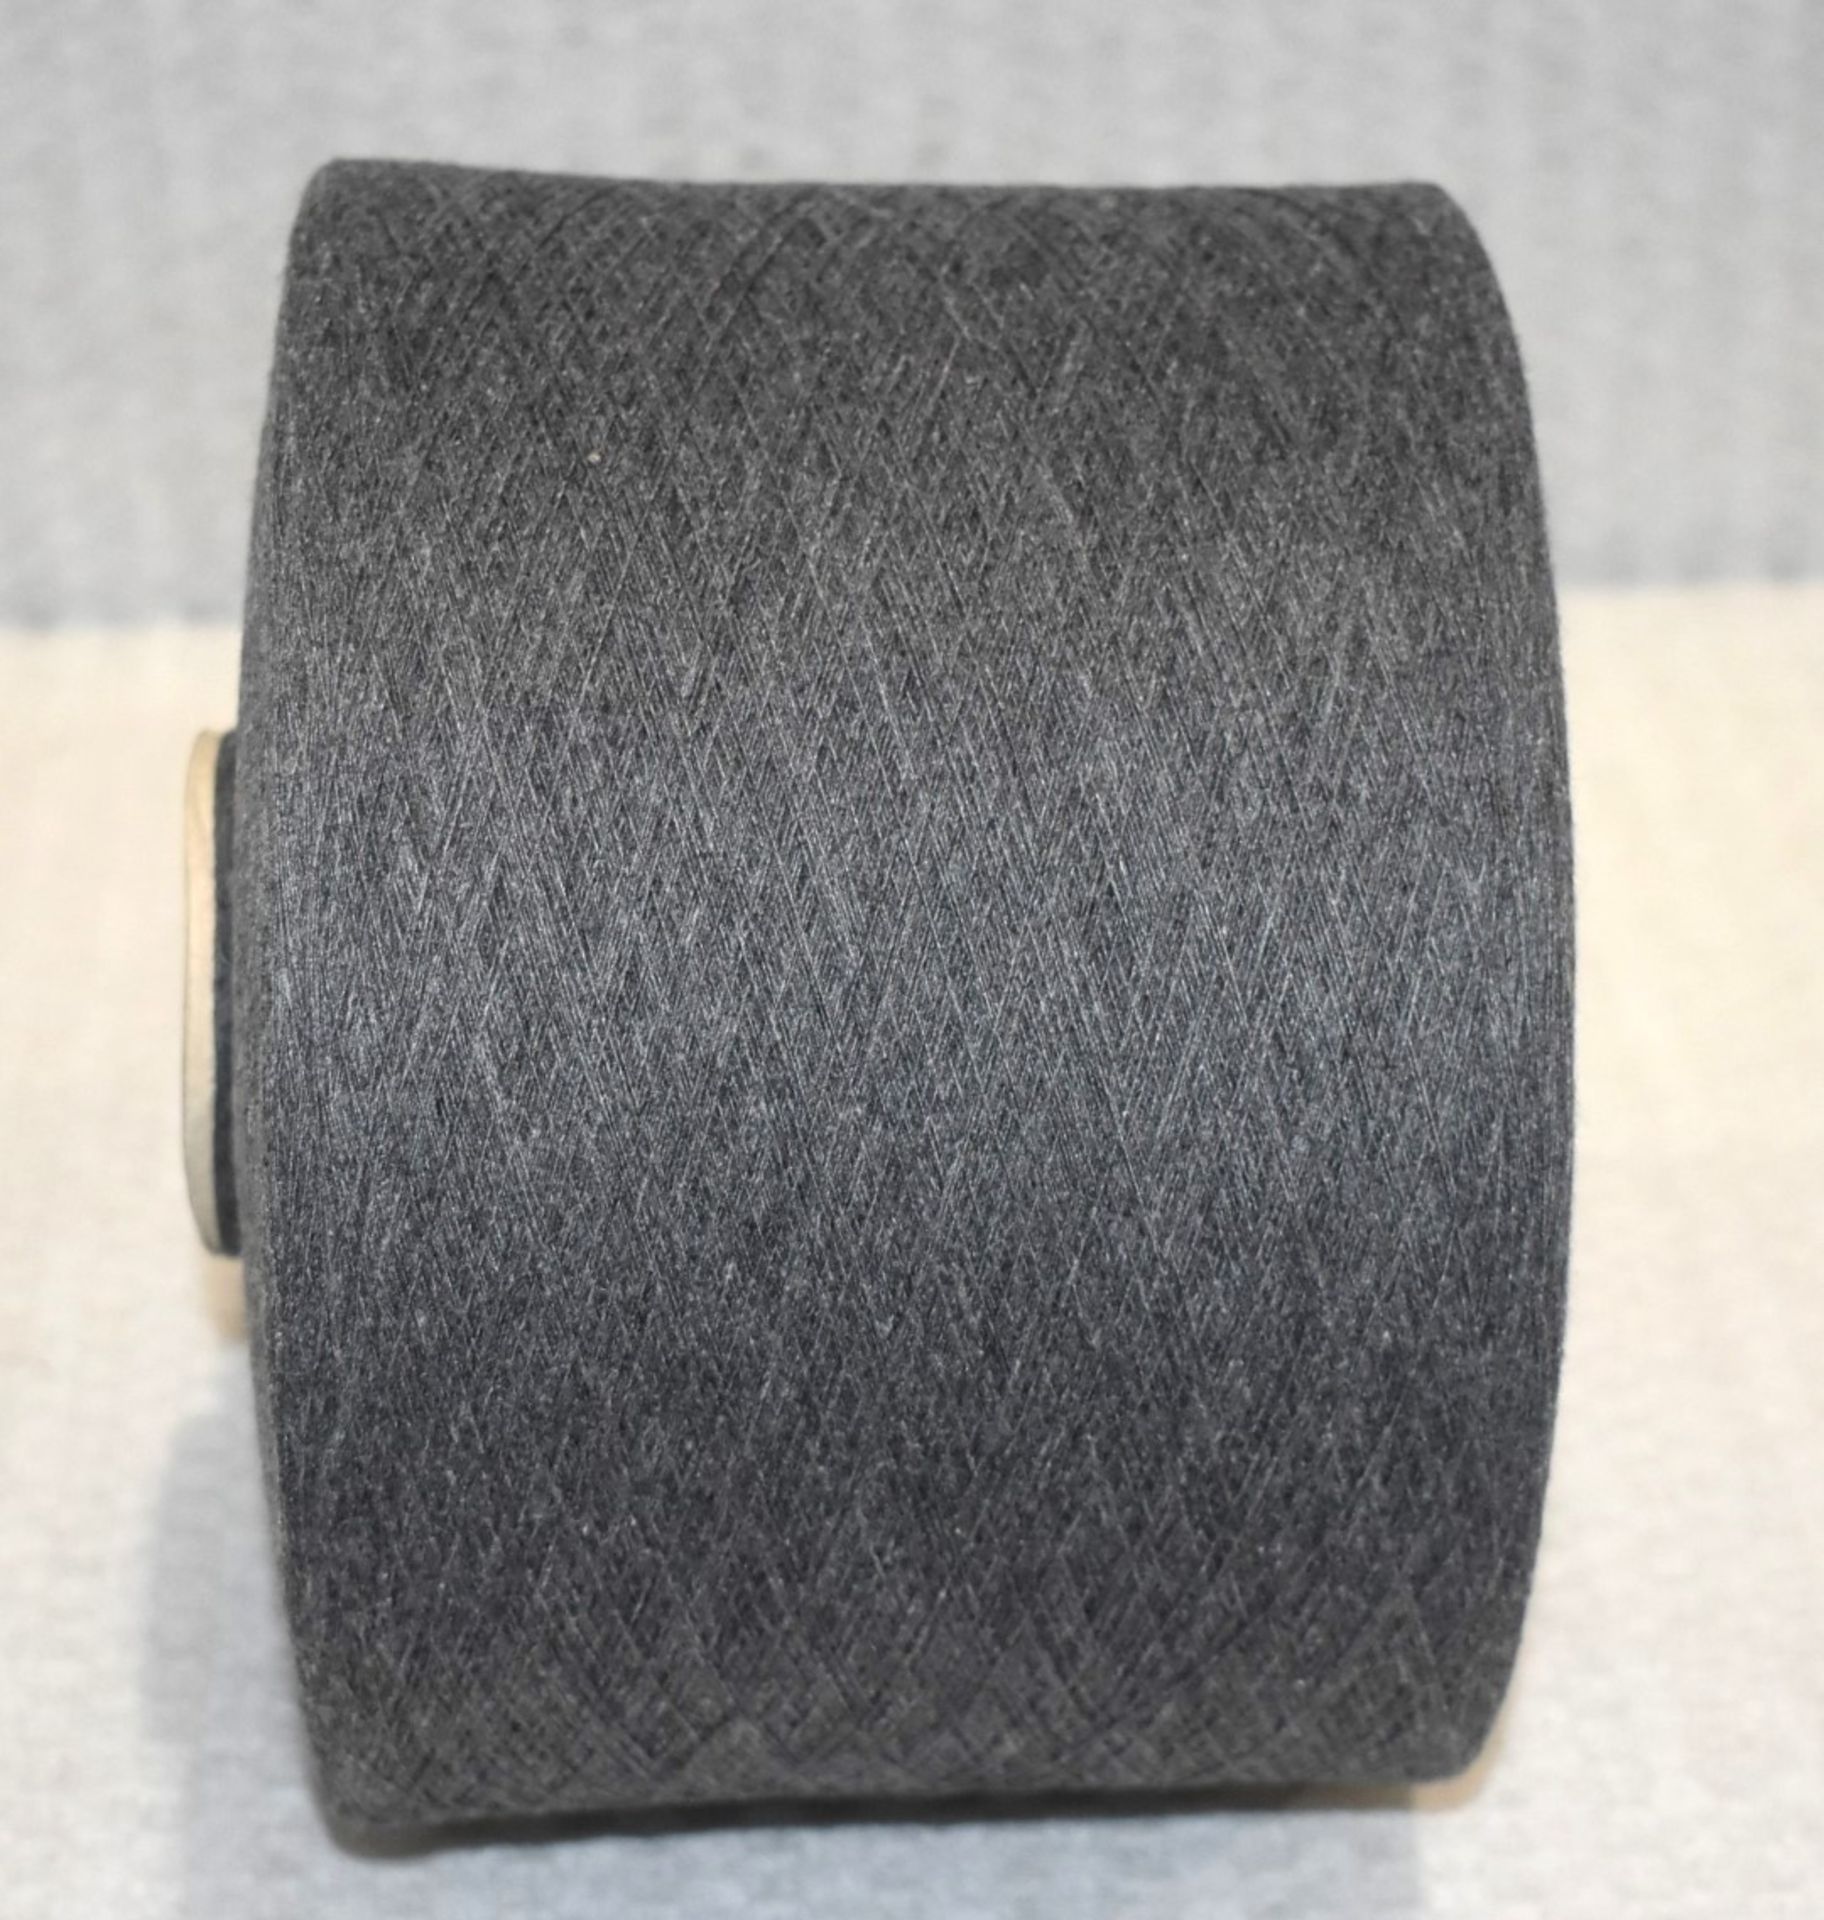 4 x Cones of 1/13 MicroCotton Knitting Yarn - Mid Grey - Approx Weight: 2,500g - New Stock ABL Yarn - Image 16 of 17